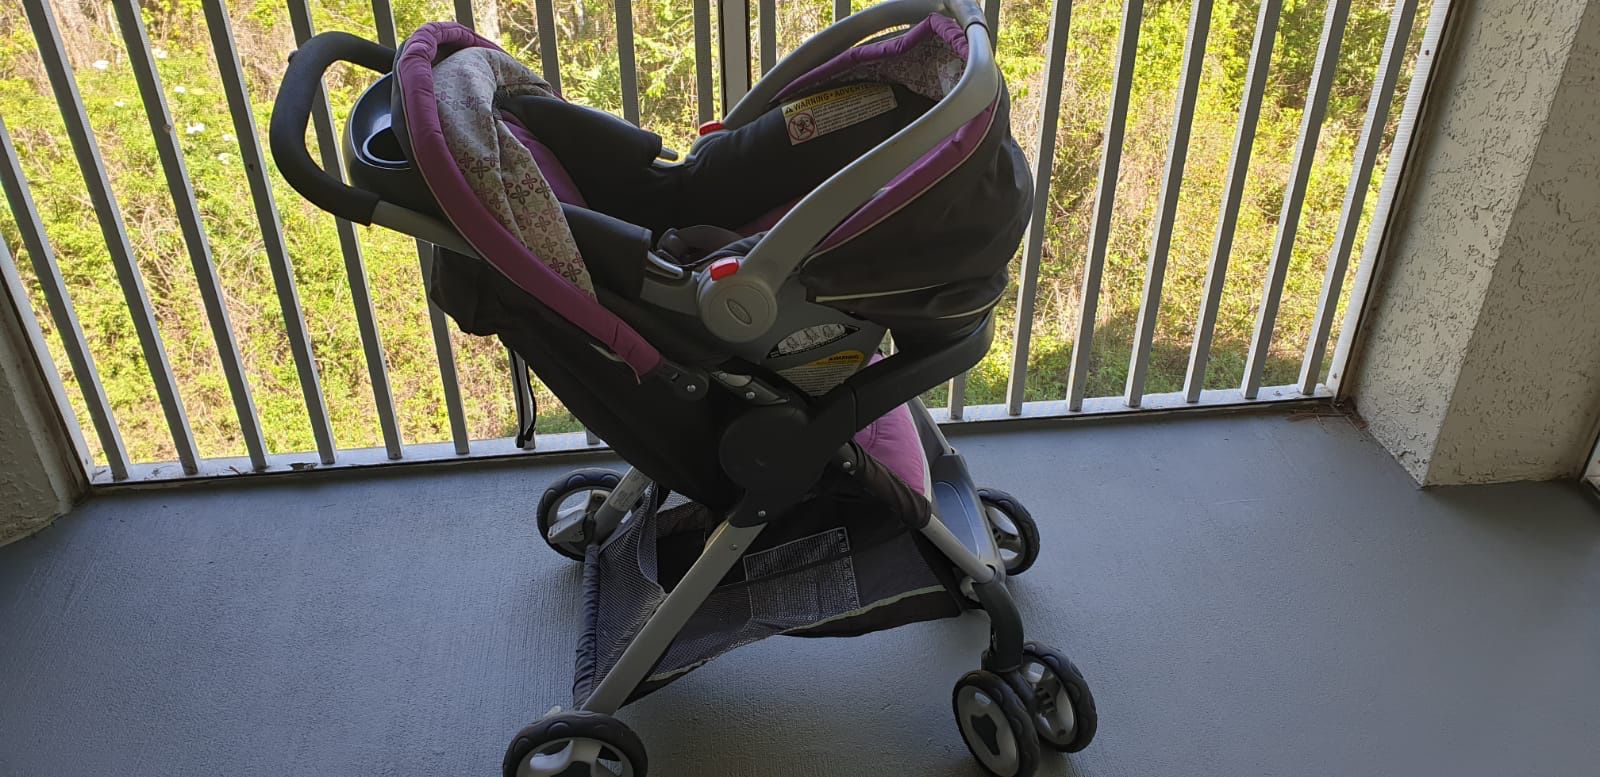 Graco baby stroller and car seat